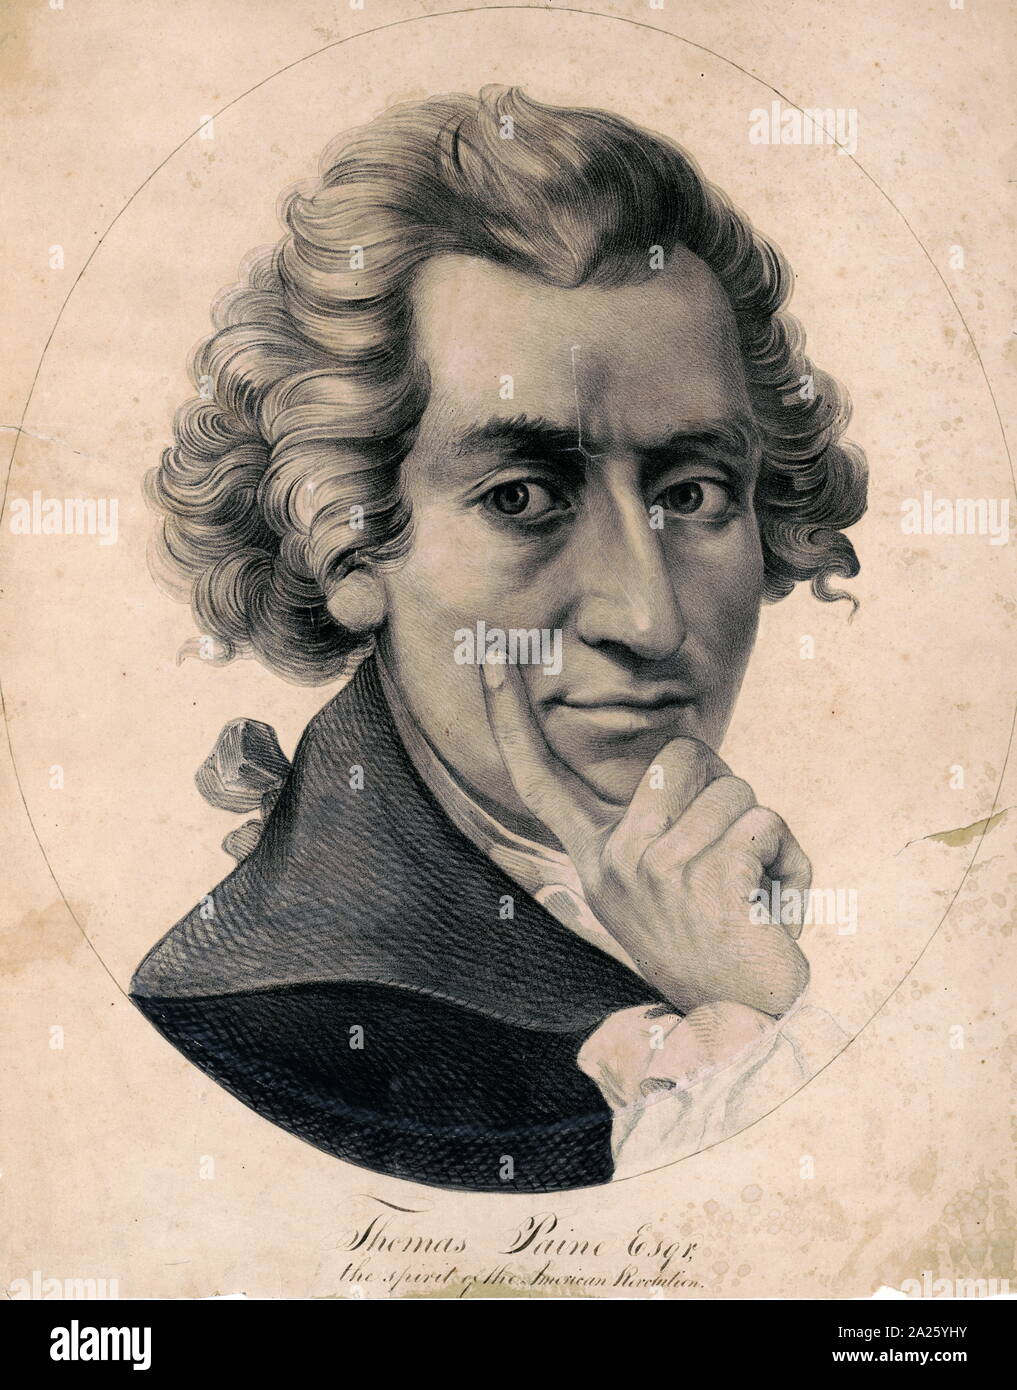 An engraved portrait of Thomas Paine (1737-1809) an English-born ...